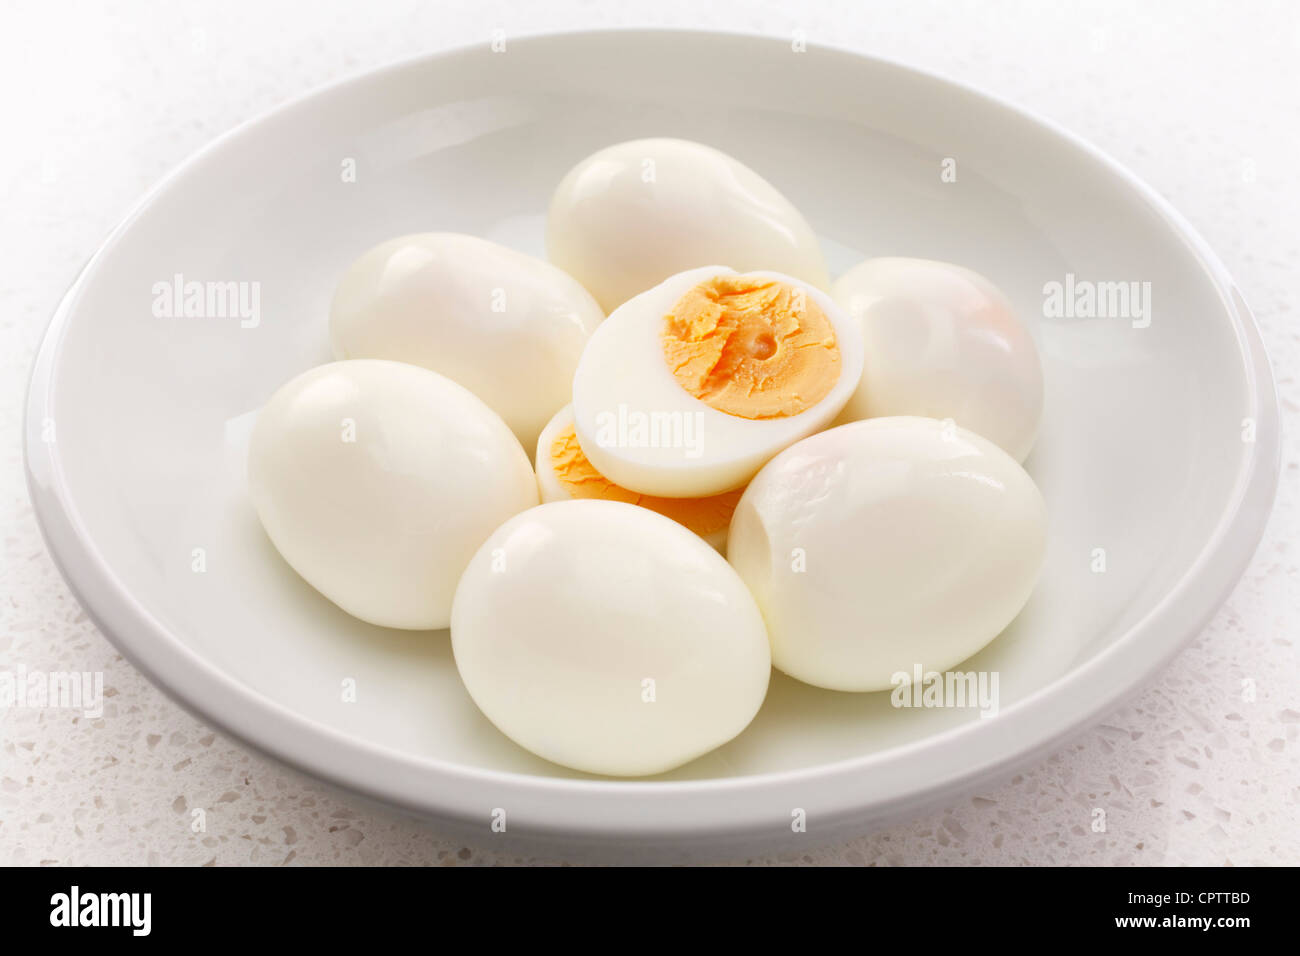 Seven hard boiled eggs in a white bowl, one cut into halves. Stock Photo